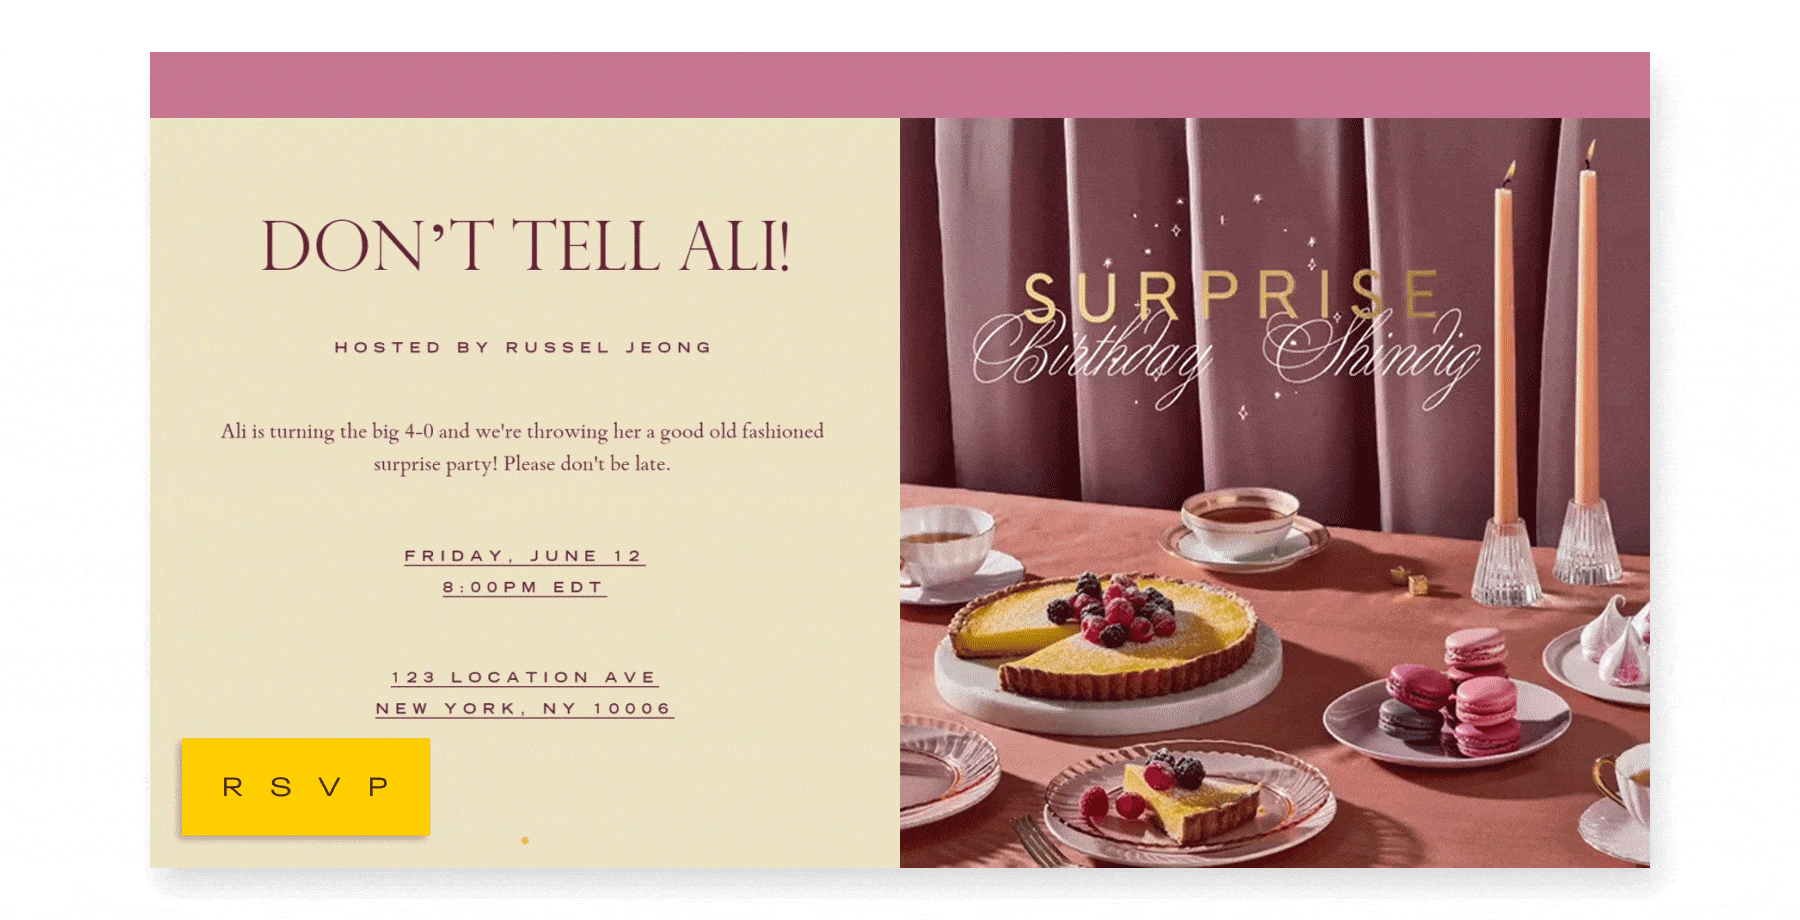 An online invite reads DON’T TELL ALI! with an animated image of desserts and candles on a pink-themed table.